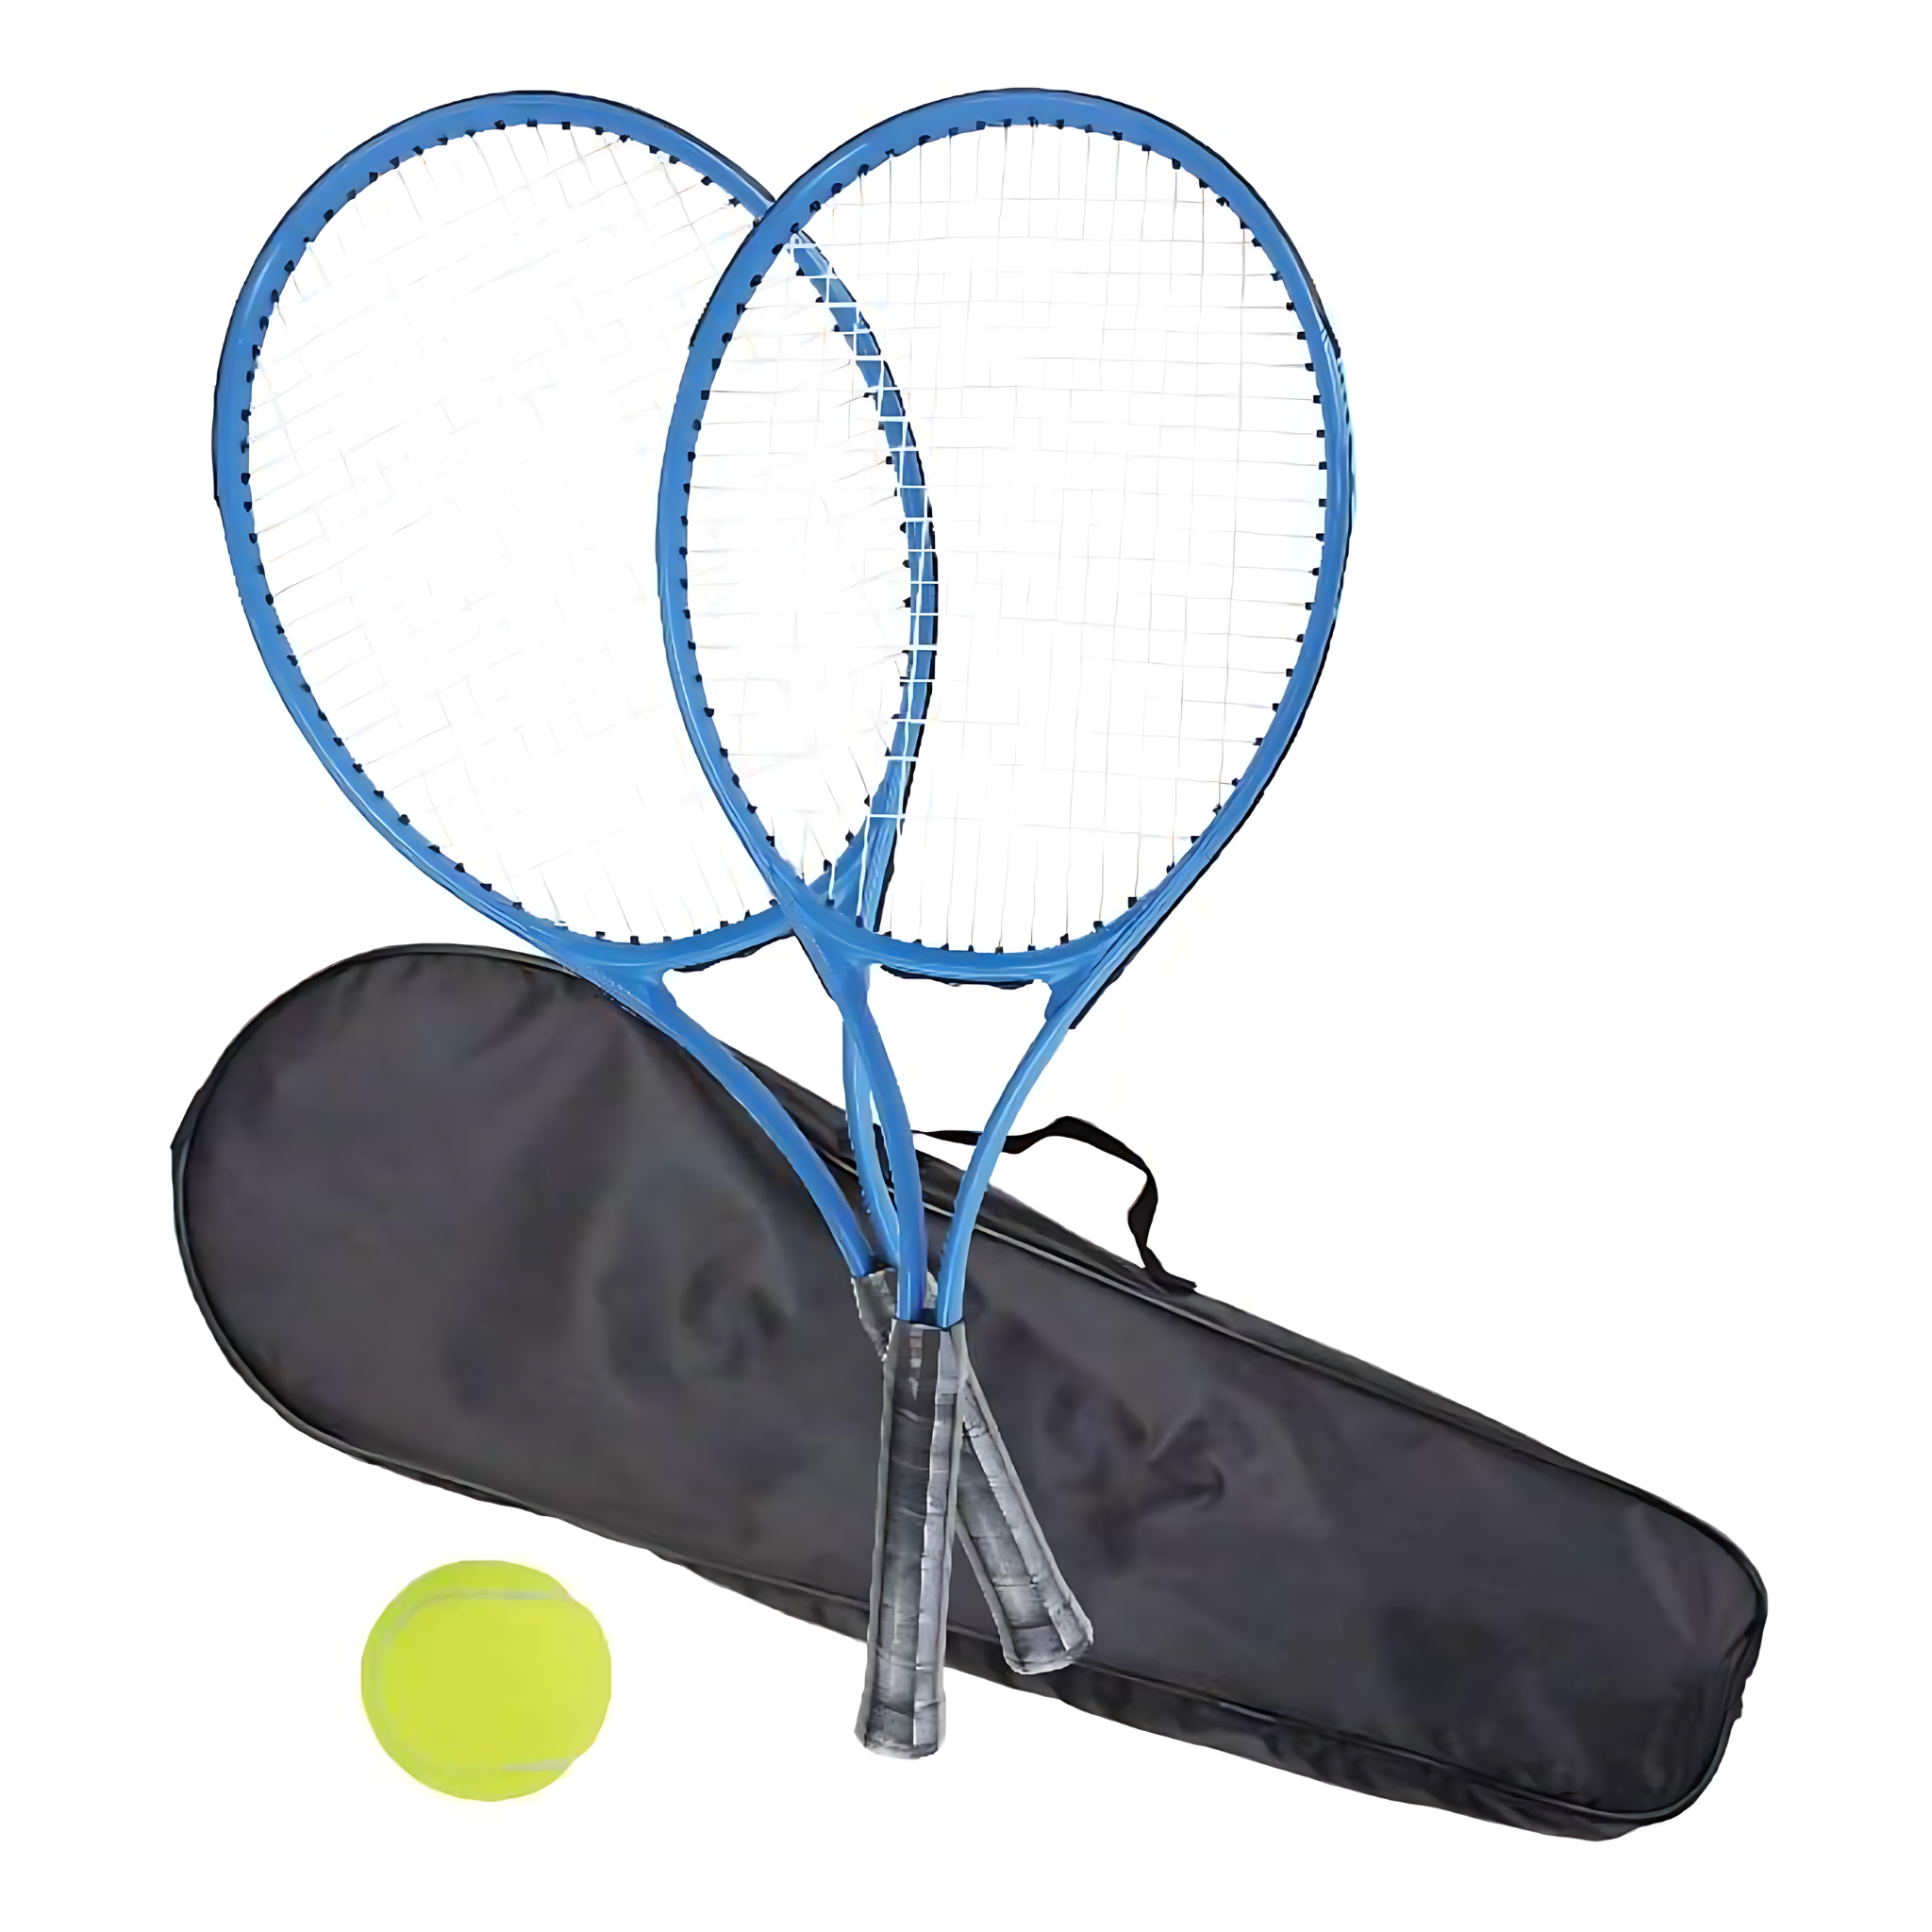 ADEPTNA 2 Player Tennis Racket Set with Carry Case for Kids Children